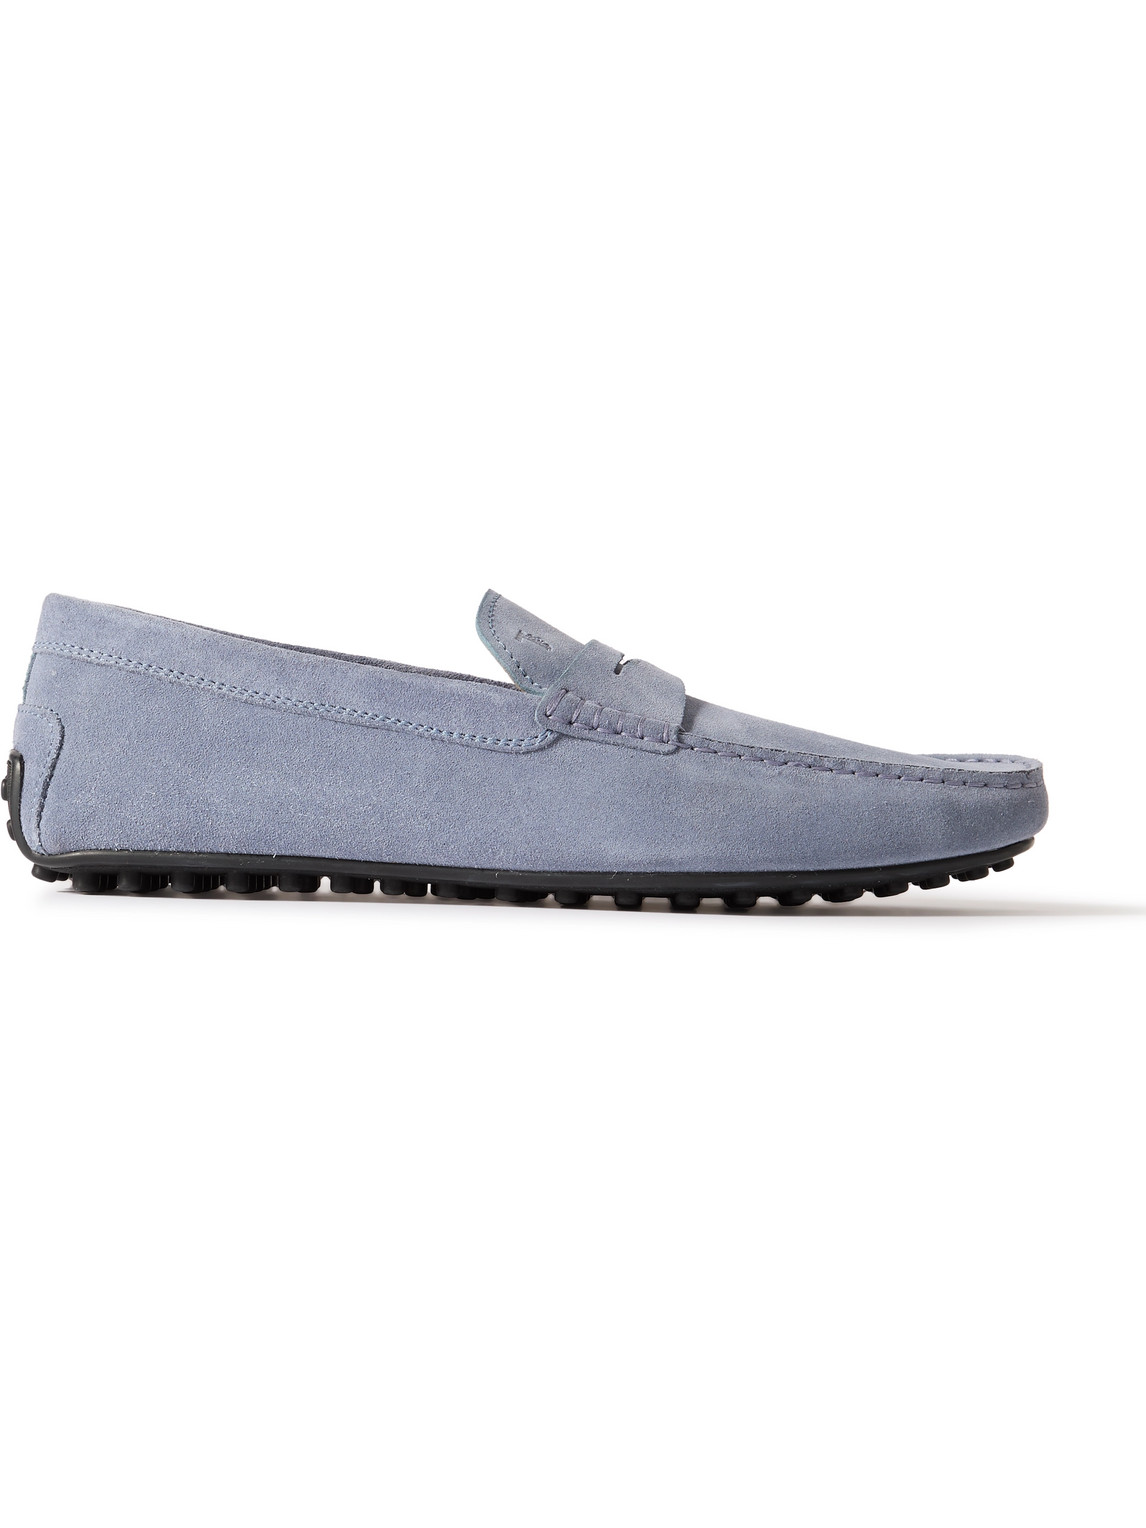 Tod's - City Gommino Logo-Debossed Suede Driving Shoes - Men - Blue - UK 9 von Tod's